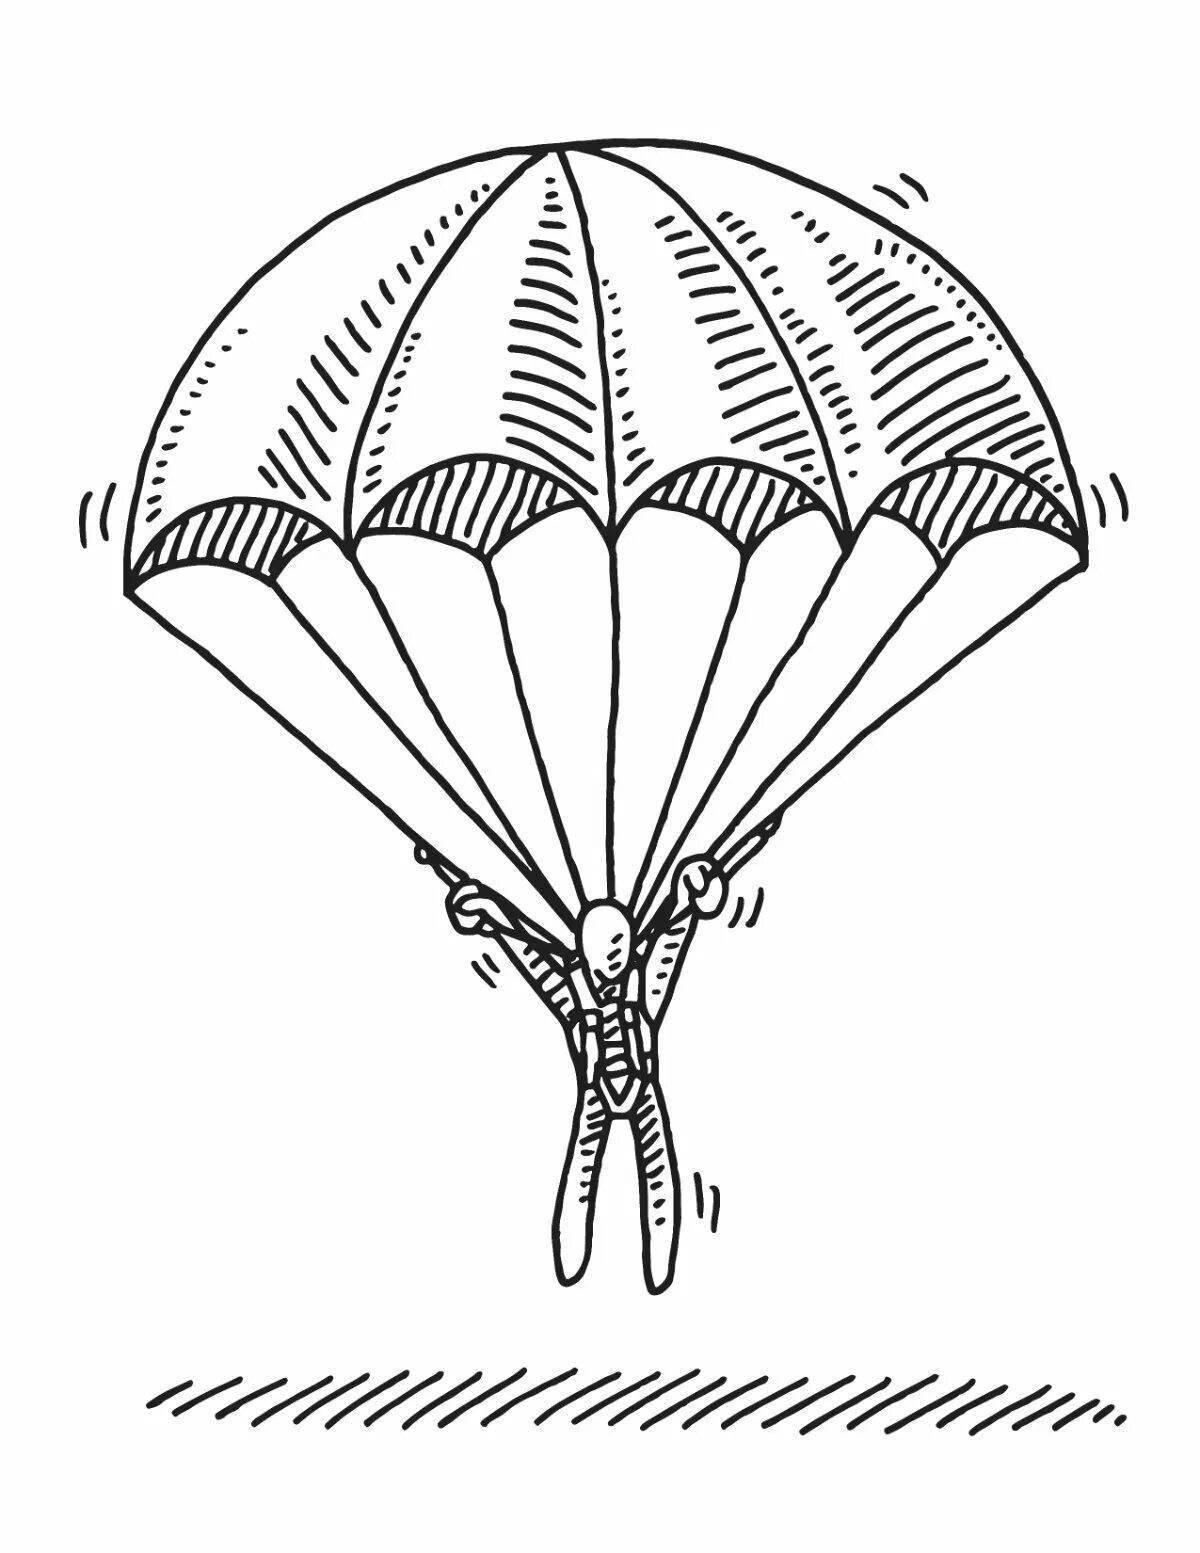 Coloring book confident skydiver